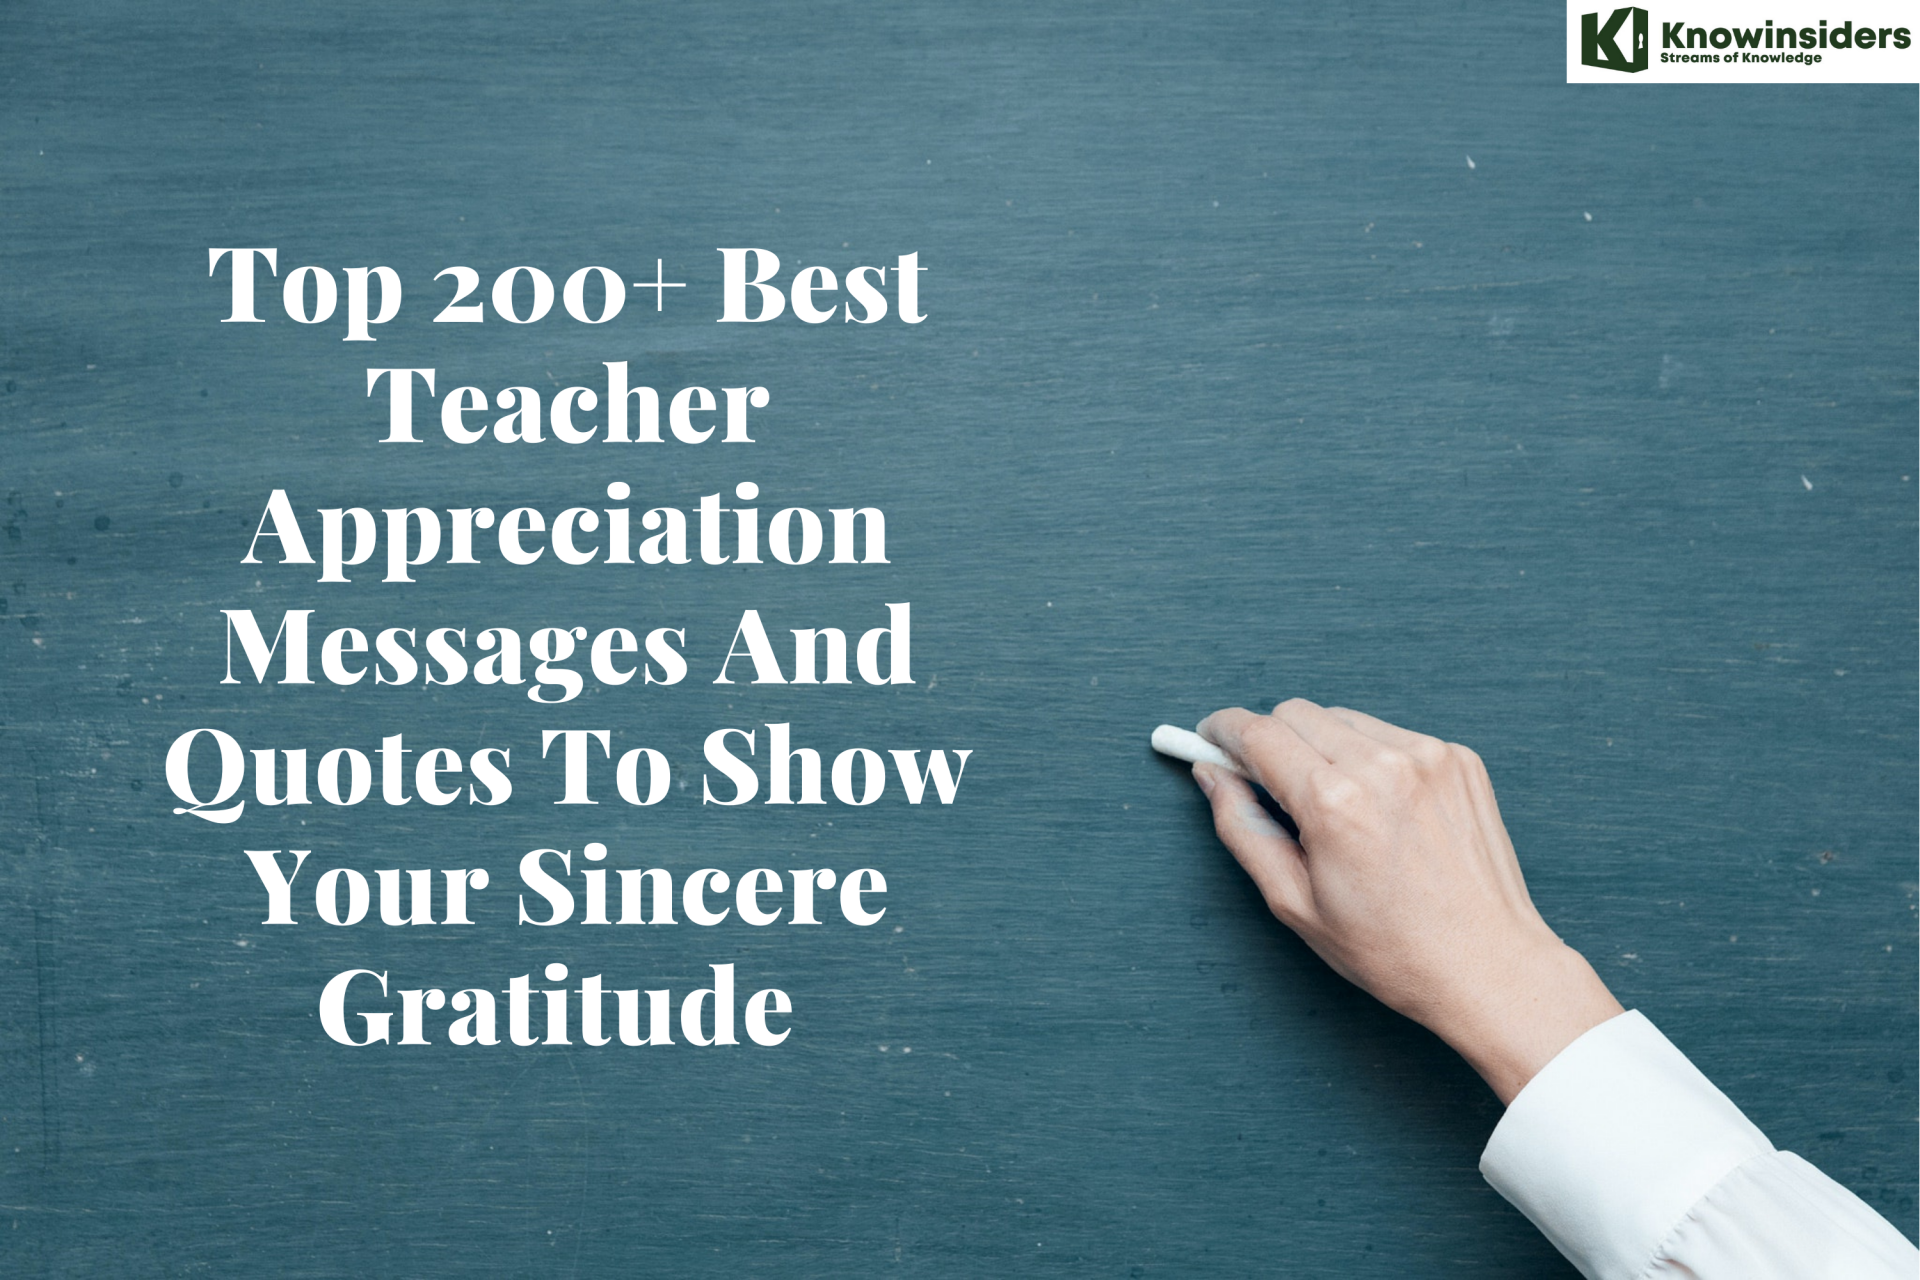 Top 200+ Best Teacher Appreciation Messages And Quotes To Show Your Sincere Gratitude 